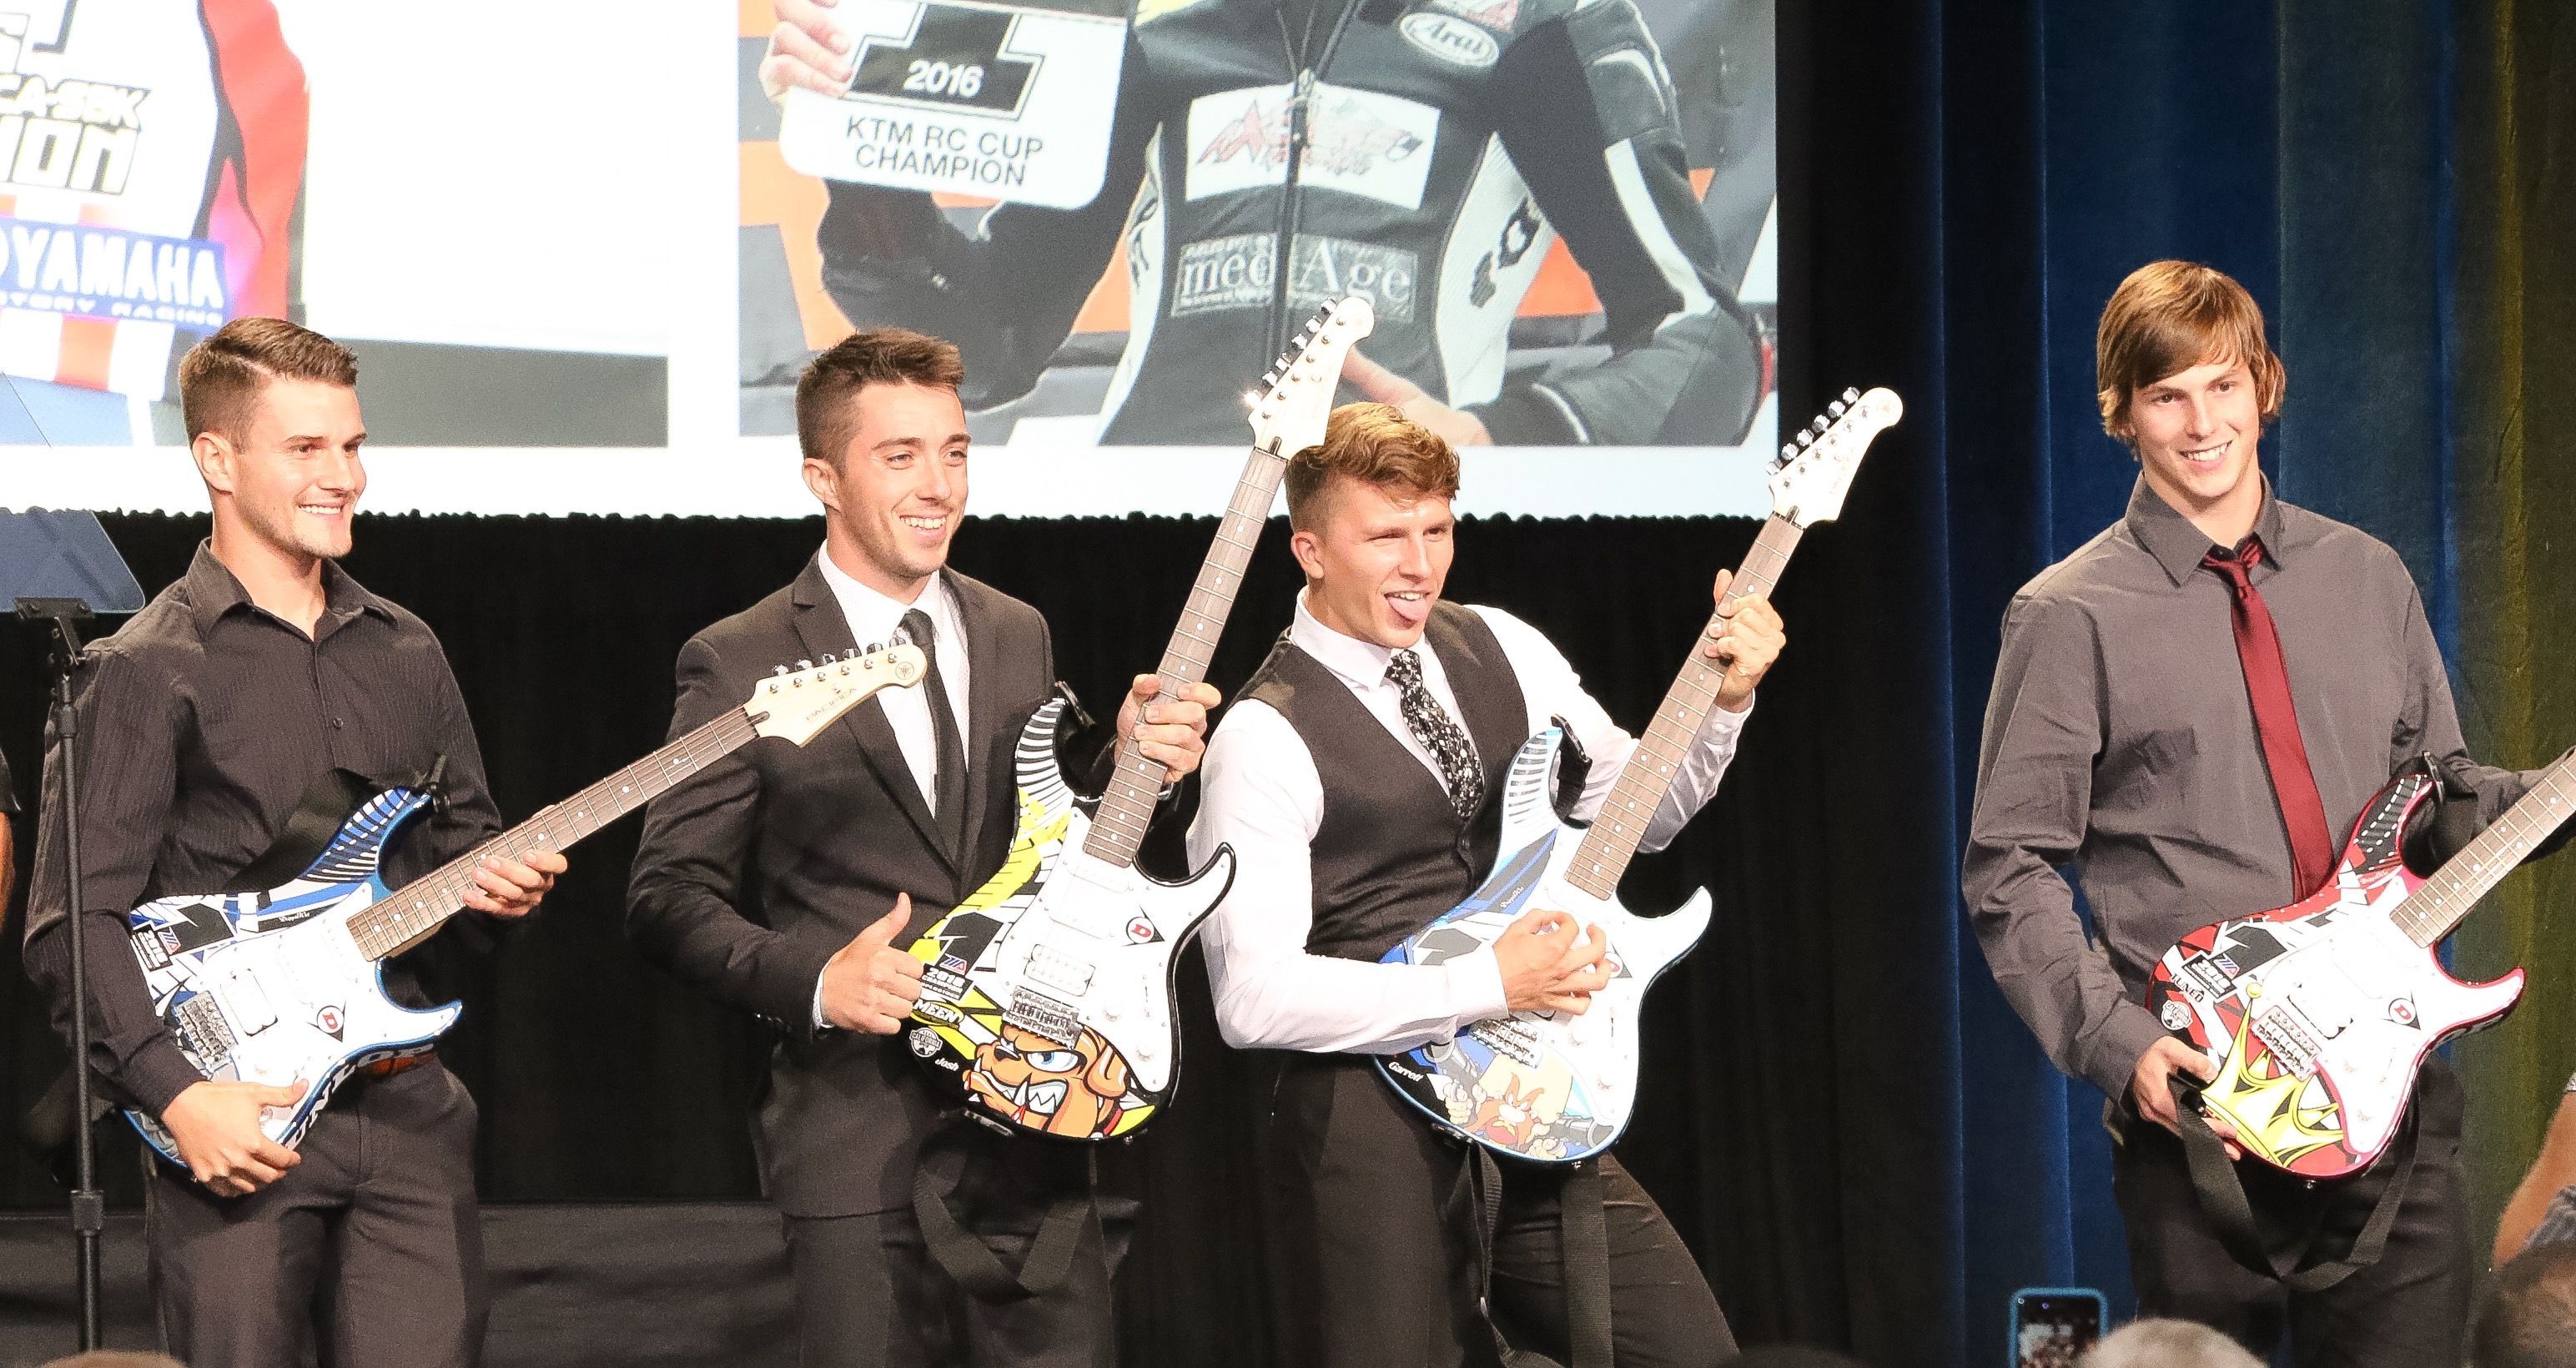 The champions received cool guitars from Dunlop